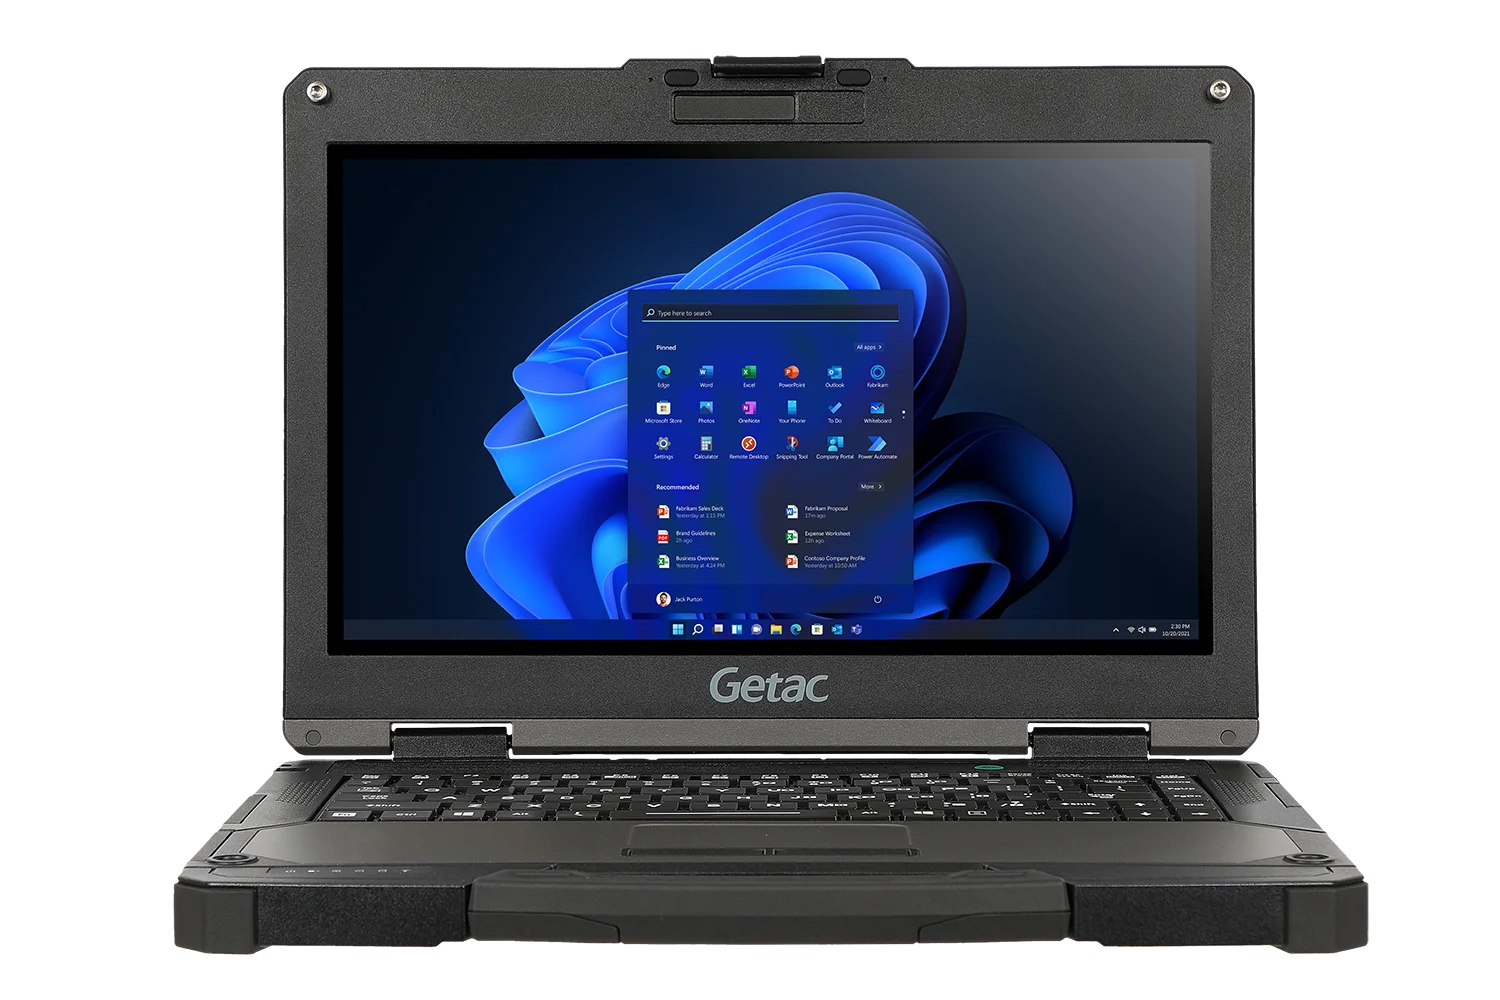 NEW!! Getac B360 - Powerful 13.3" Fully rugged Notebook for field service, 1400 nits, 10th generation Core processor